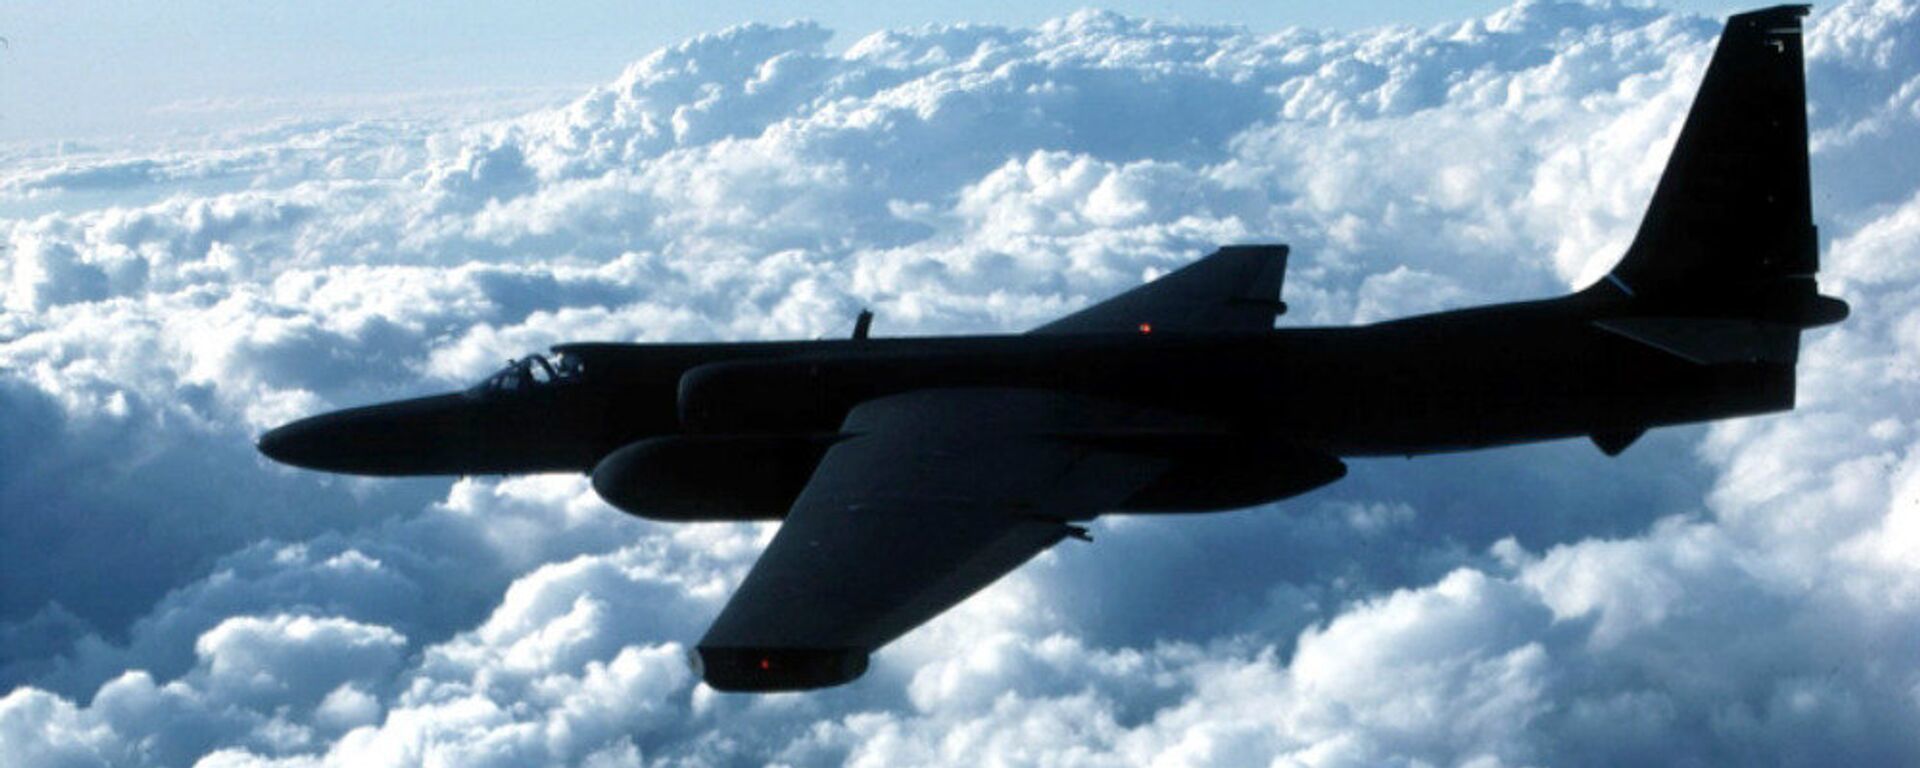 This undated US Air Force photo shows a U-2 spy plane which is expected to be used by the US in the war against terrorism - Sputnik International, 1920, 29.04.2021